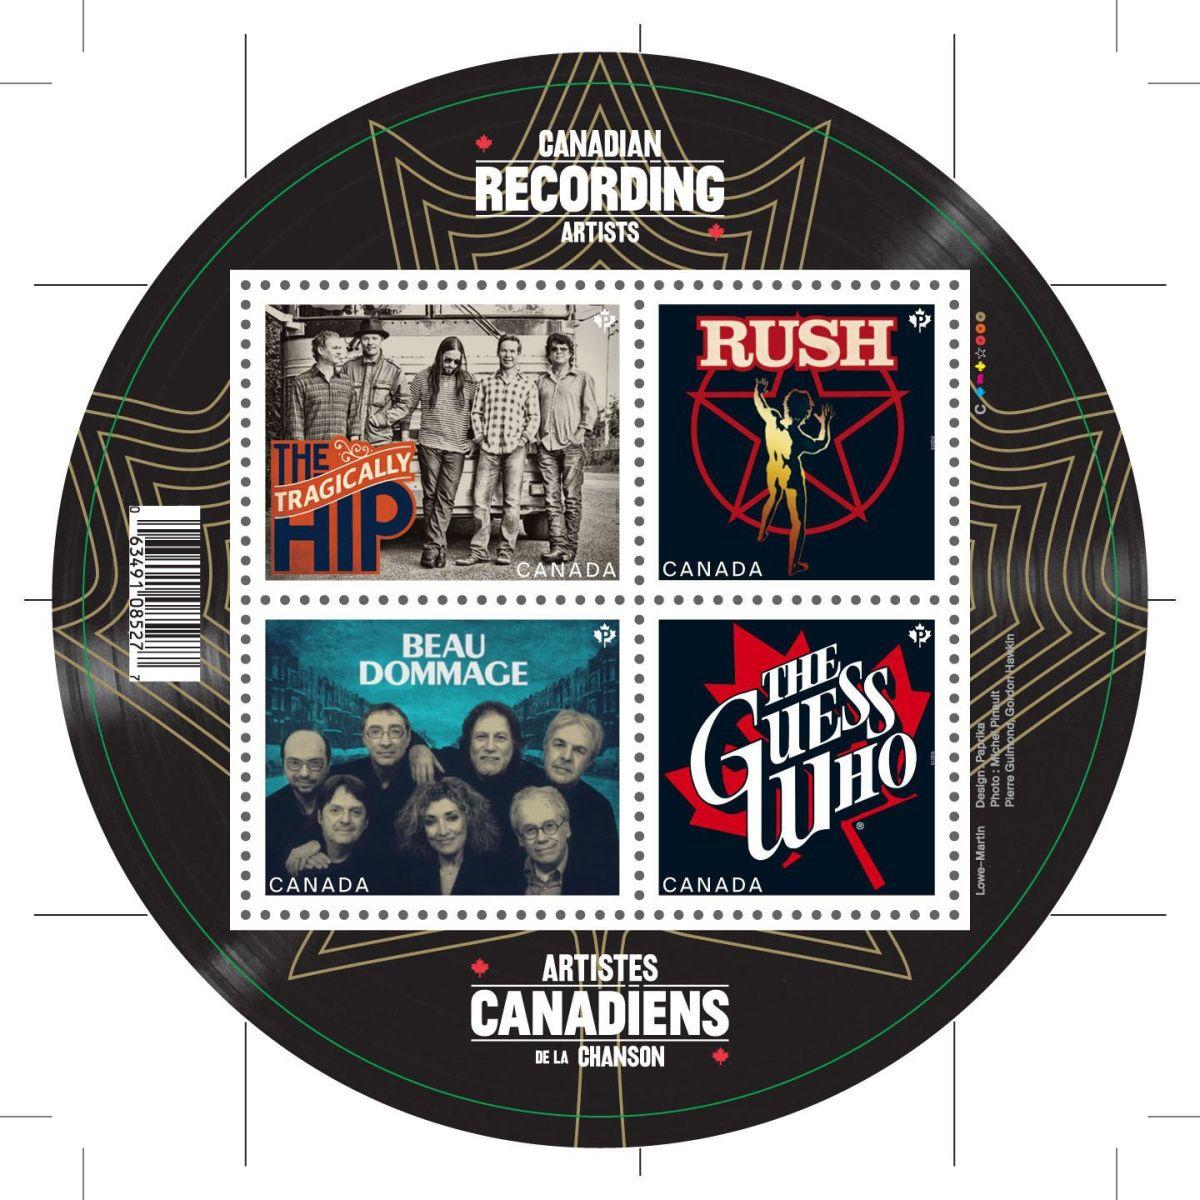 2013 New Rock Band Logo - Canada Post reveals Rush stamp ahead of band's Hall of Fame ...